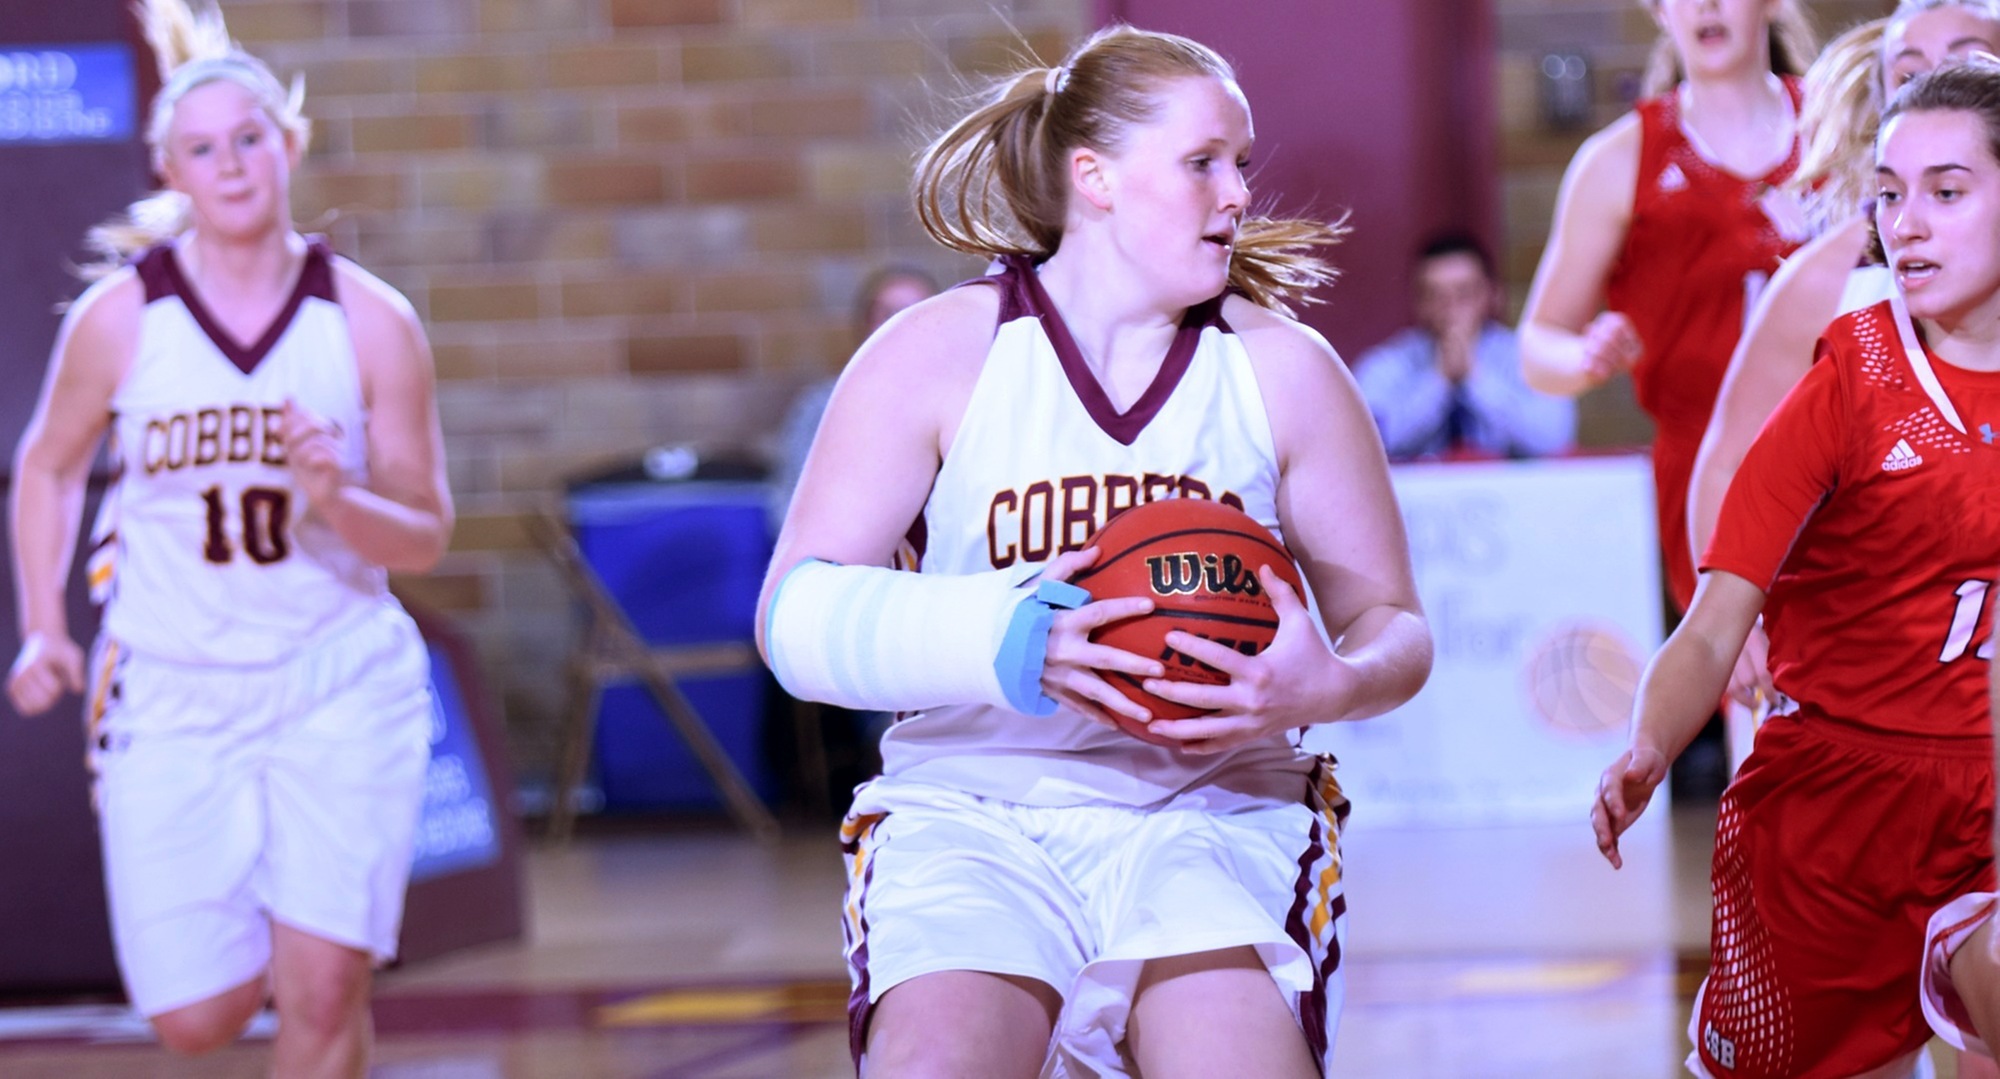 Senior Kirstin Simmons played 32 minutes and grabbed a career-high 16 rebounds in the Cobbers' overtime win at Carleton.